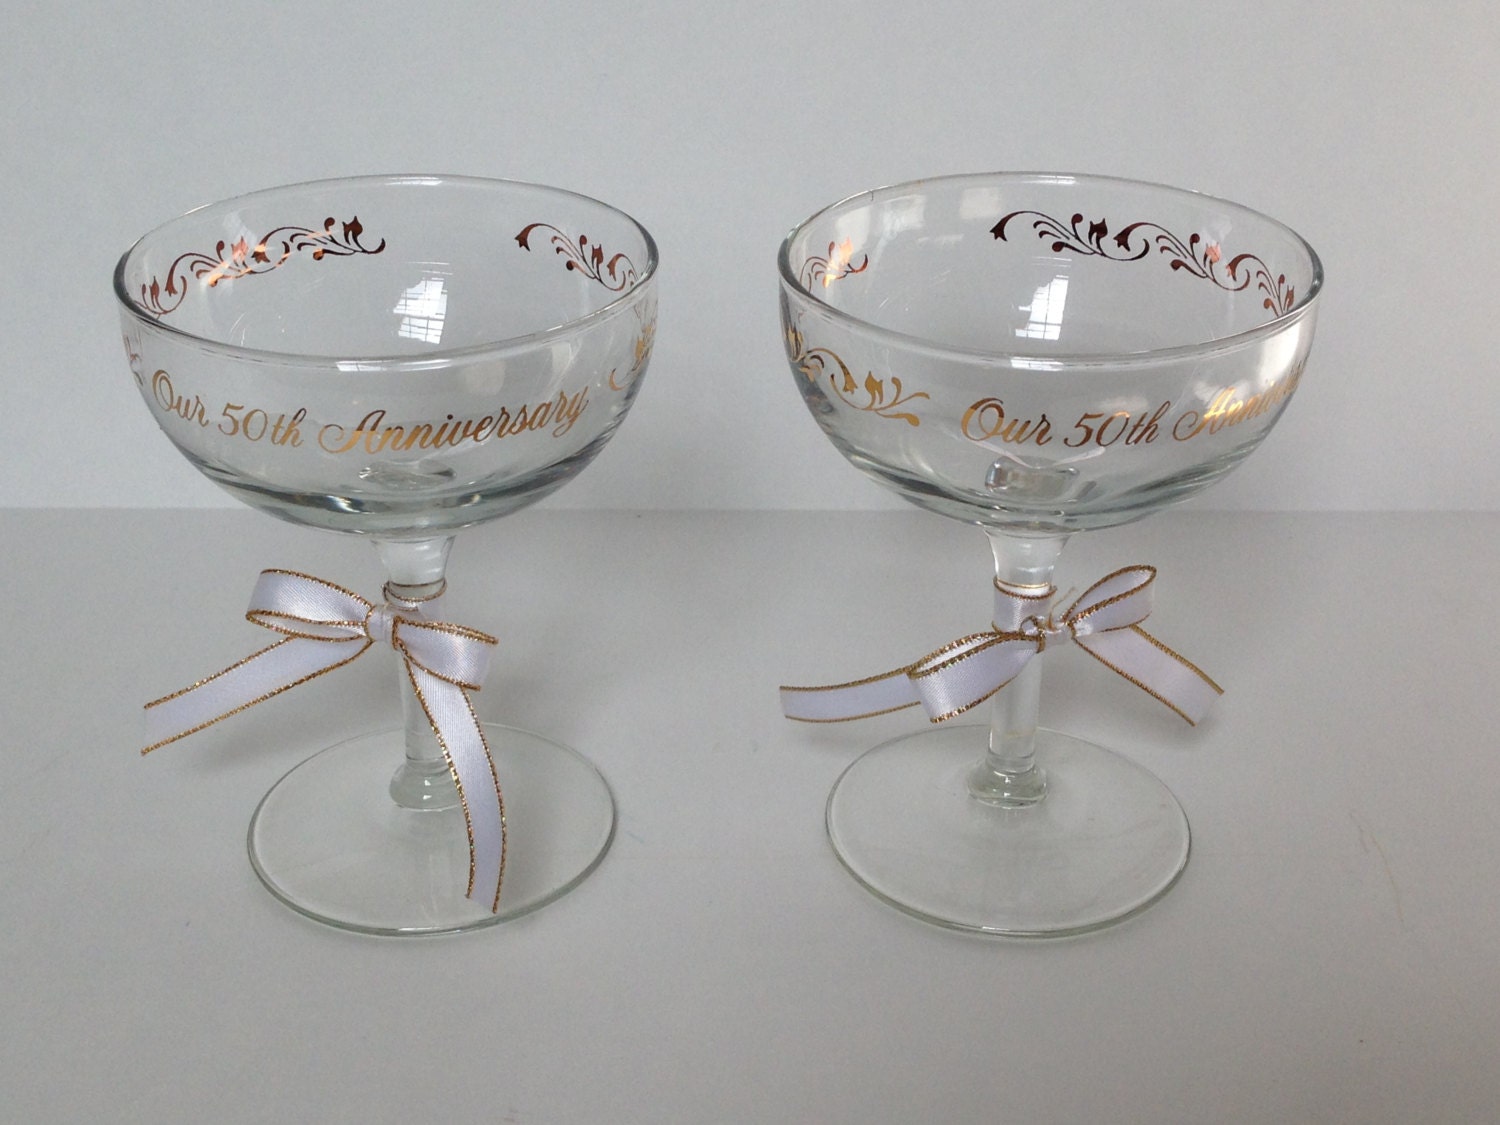 50th Wedding Anniversary champagne glasses by TheTravelingTortoise